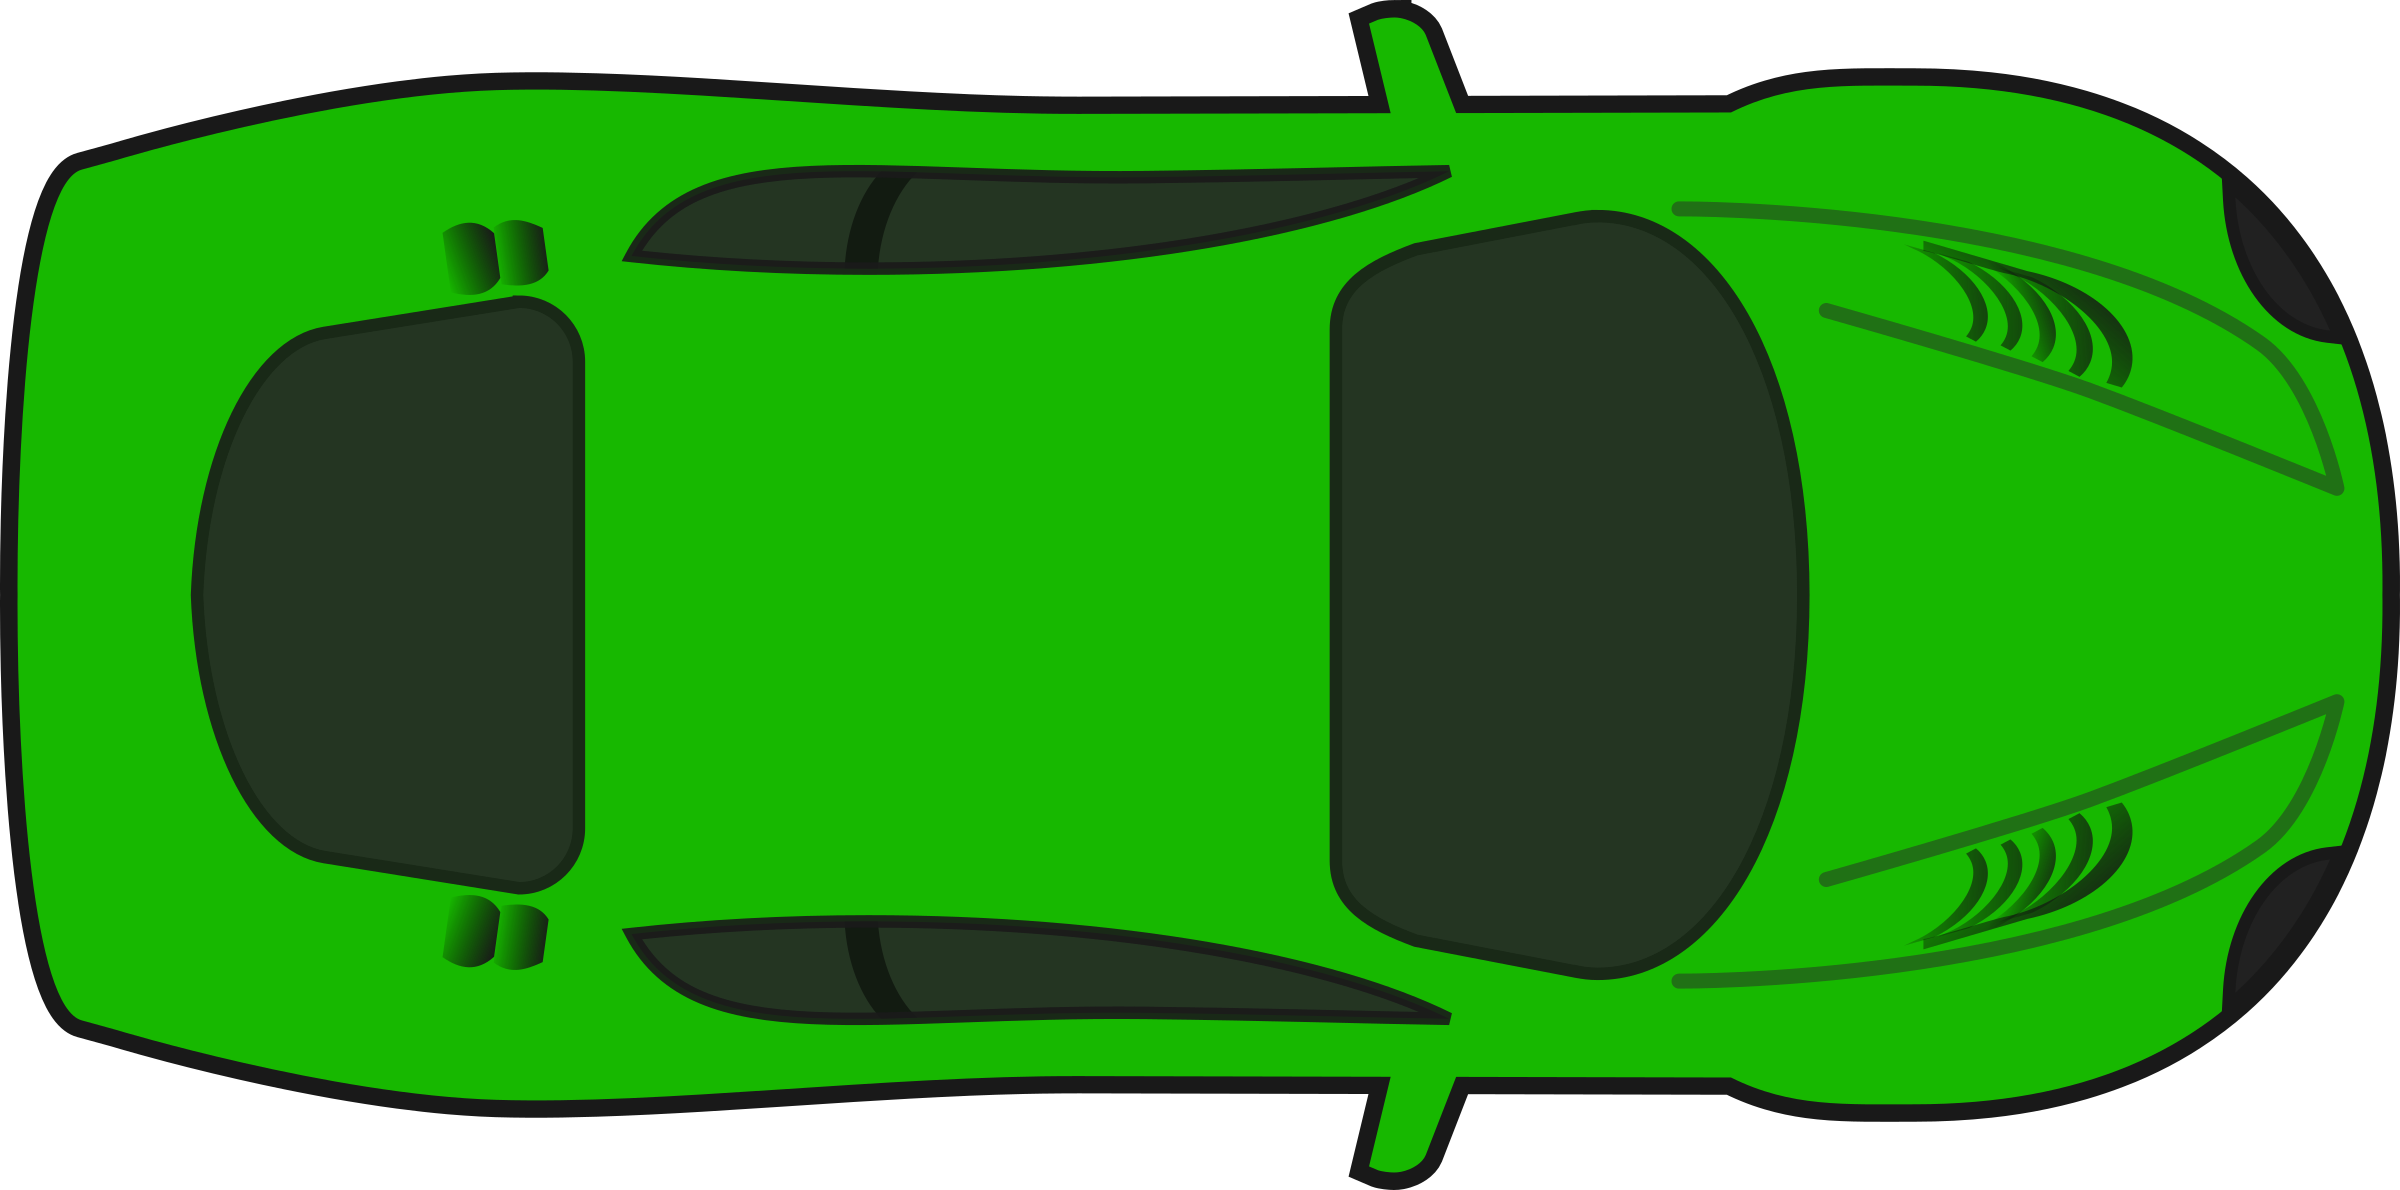 Green Racing Car  Top View  By Qubodup